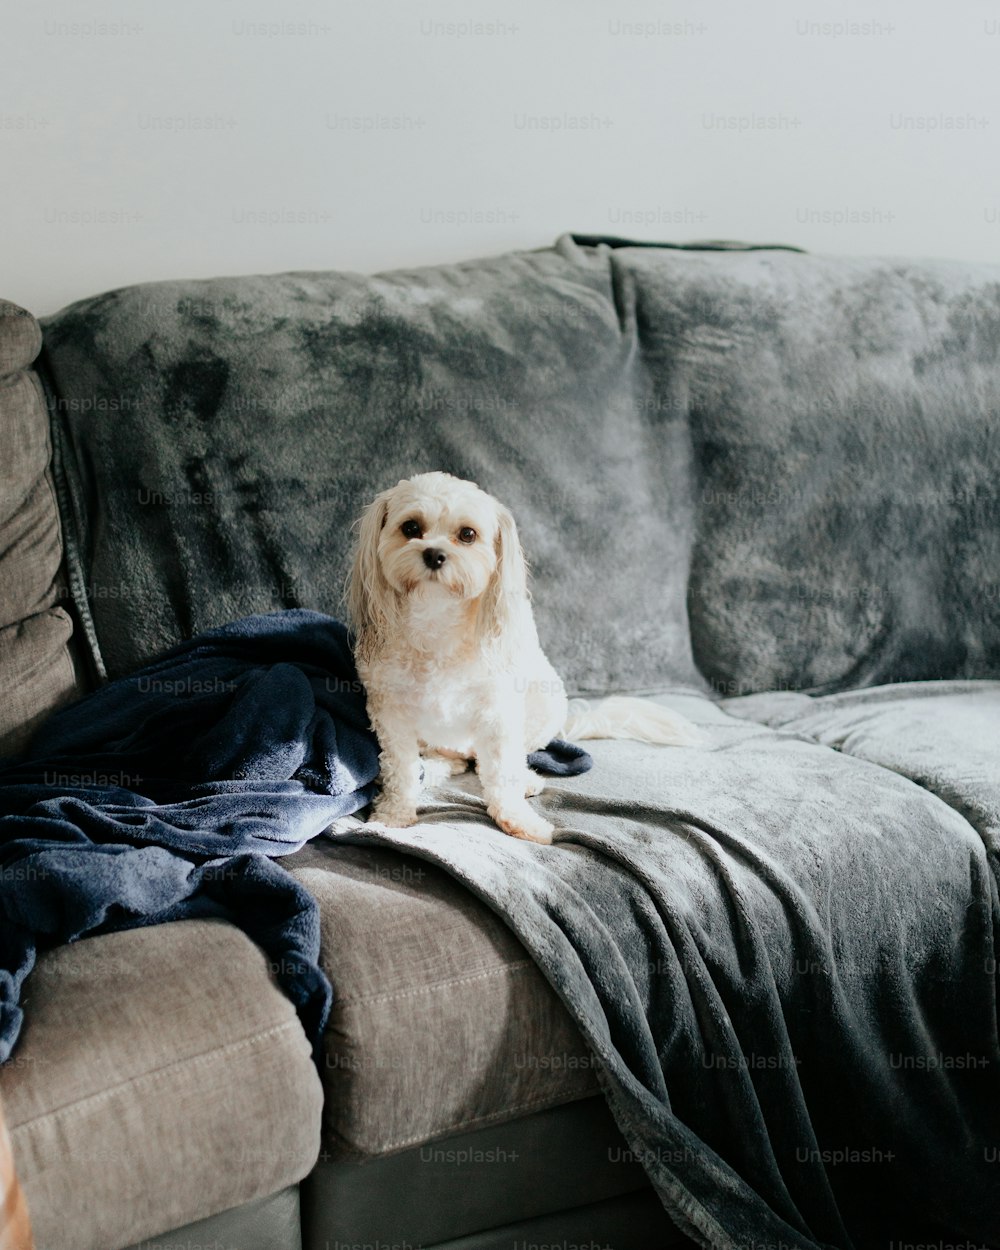 a dog sitting on a couch with a blanket on it